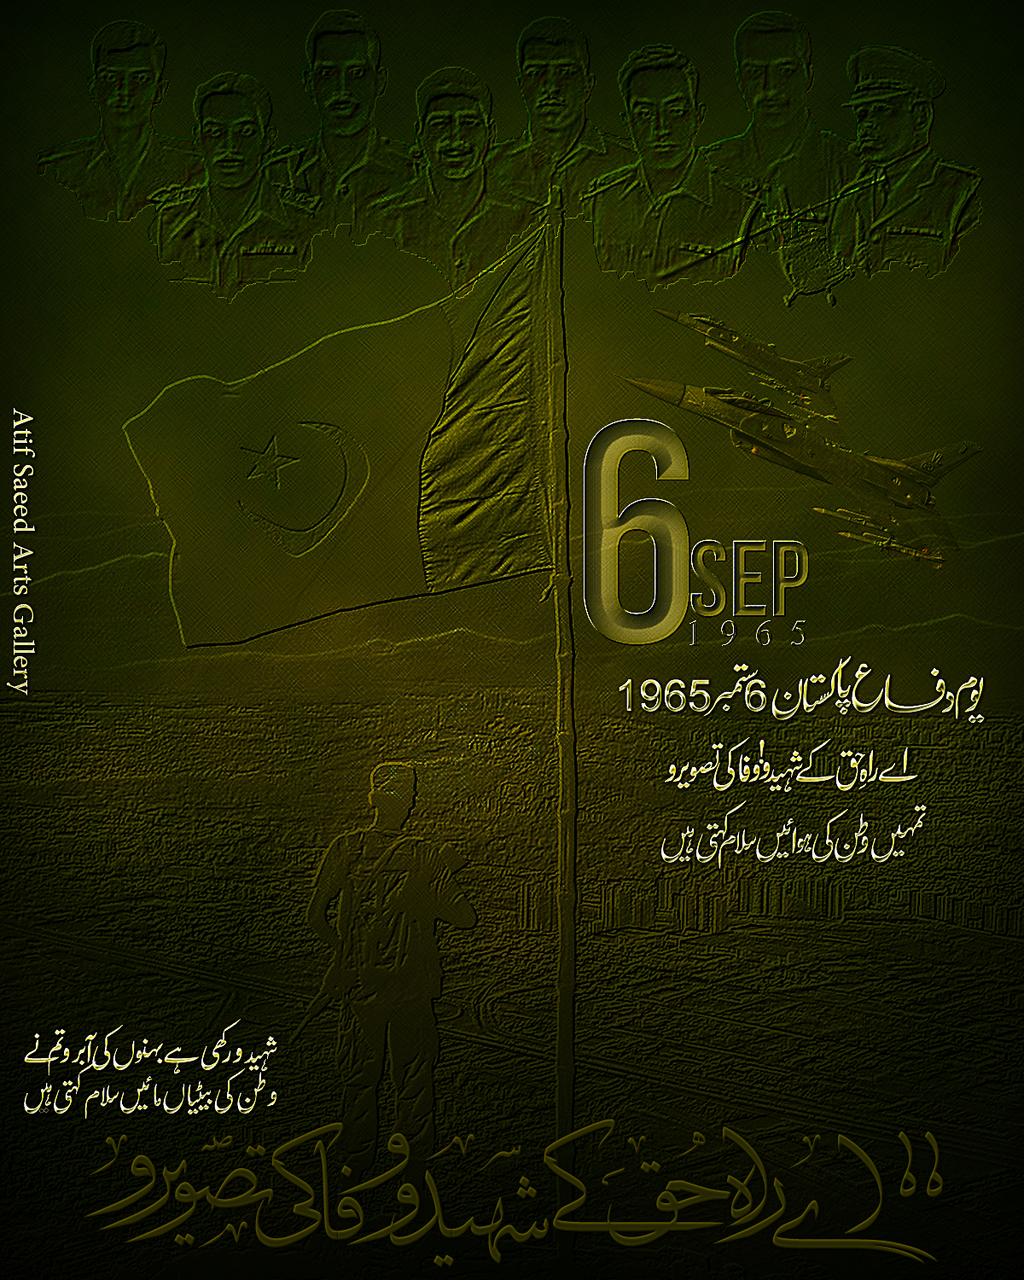 6_september_2013__defence_day_of_pakistan_by_atifsaeedicmap-d6l737h.png